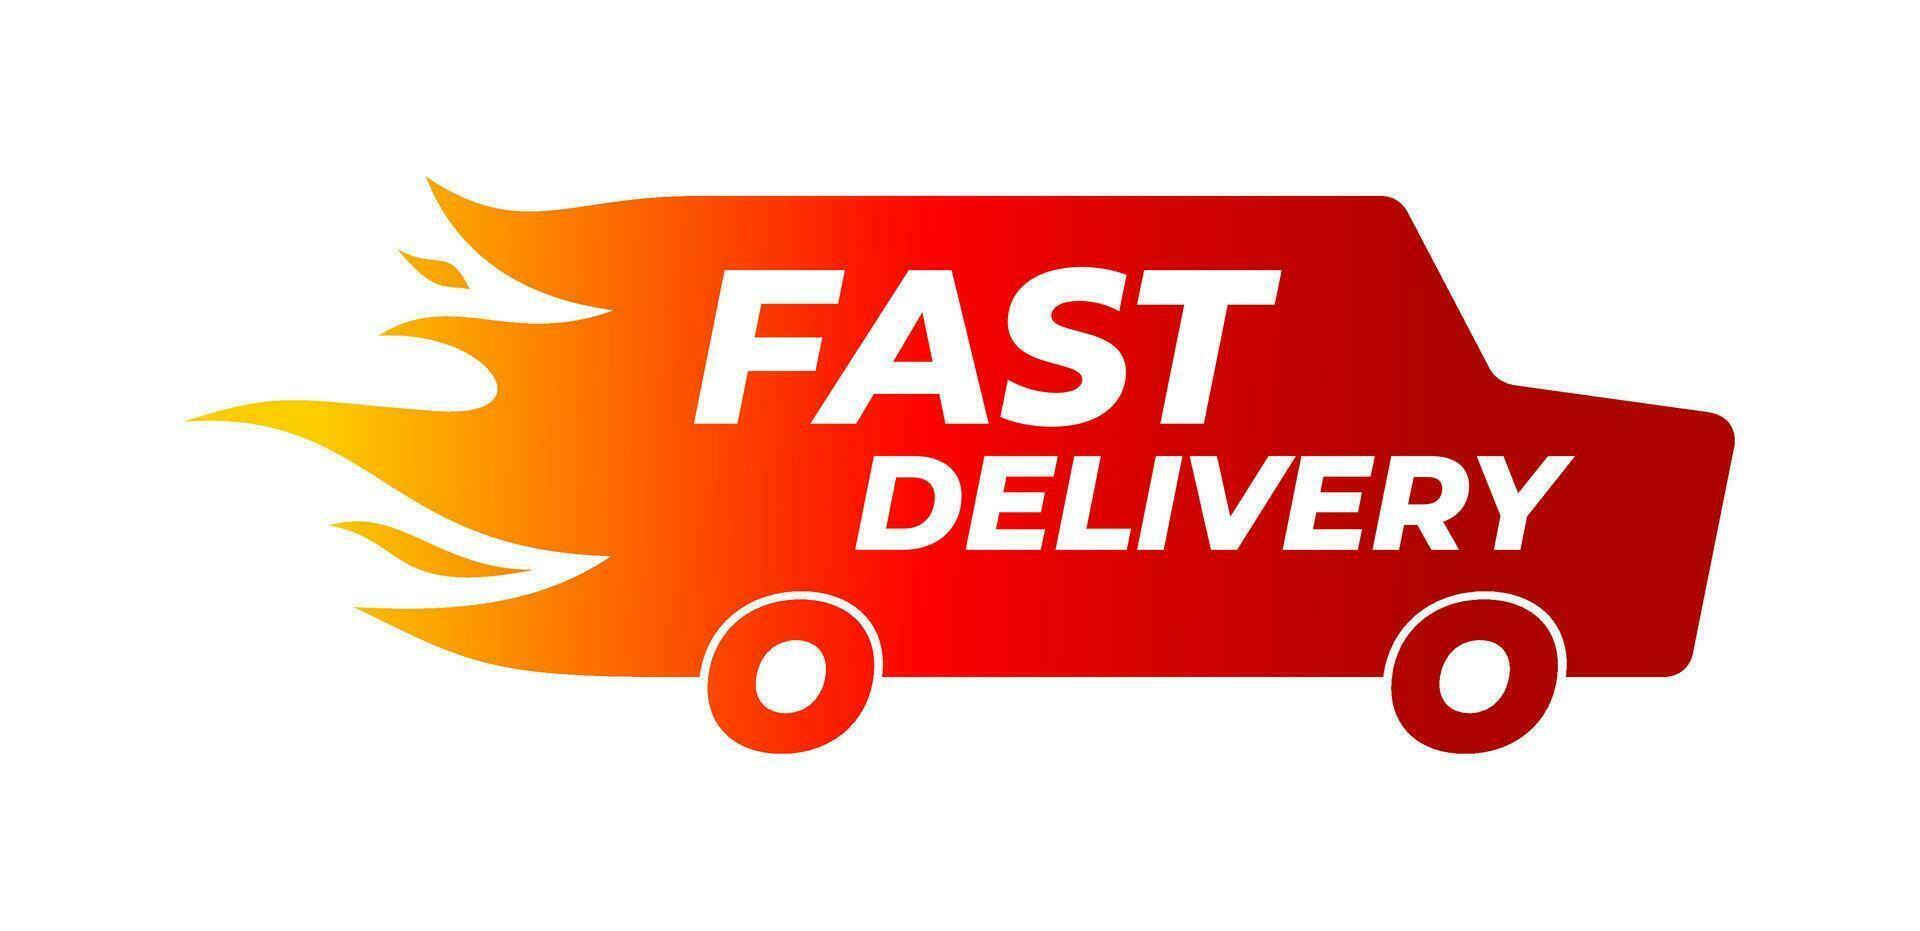 Truck and flames silhouette fast delivery icon design. Express, fast moving, Shipping delivery logo. Vector illustration